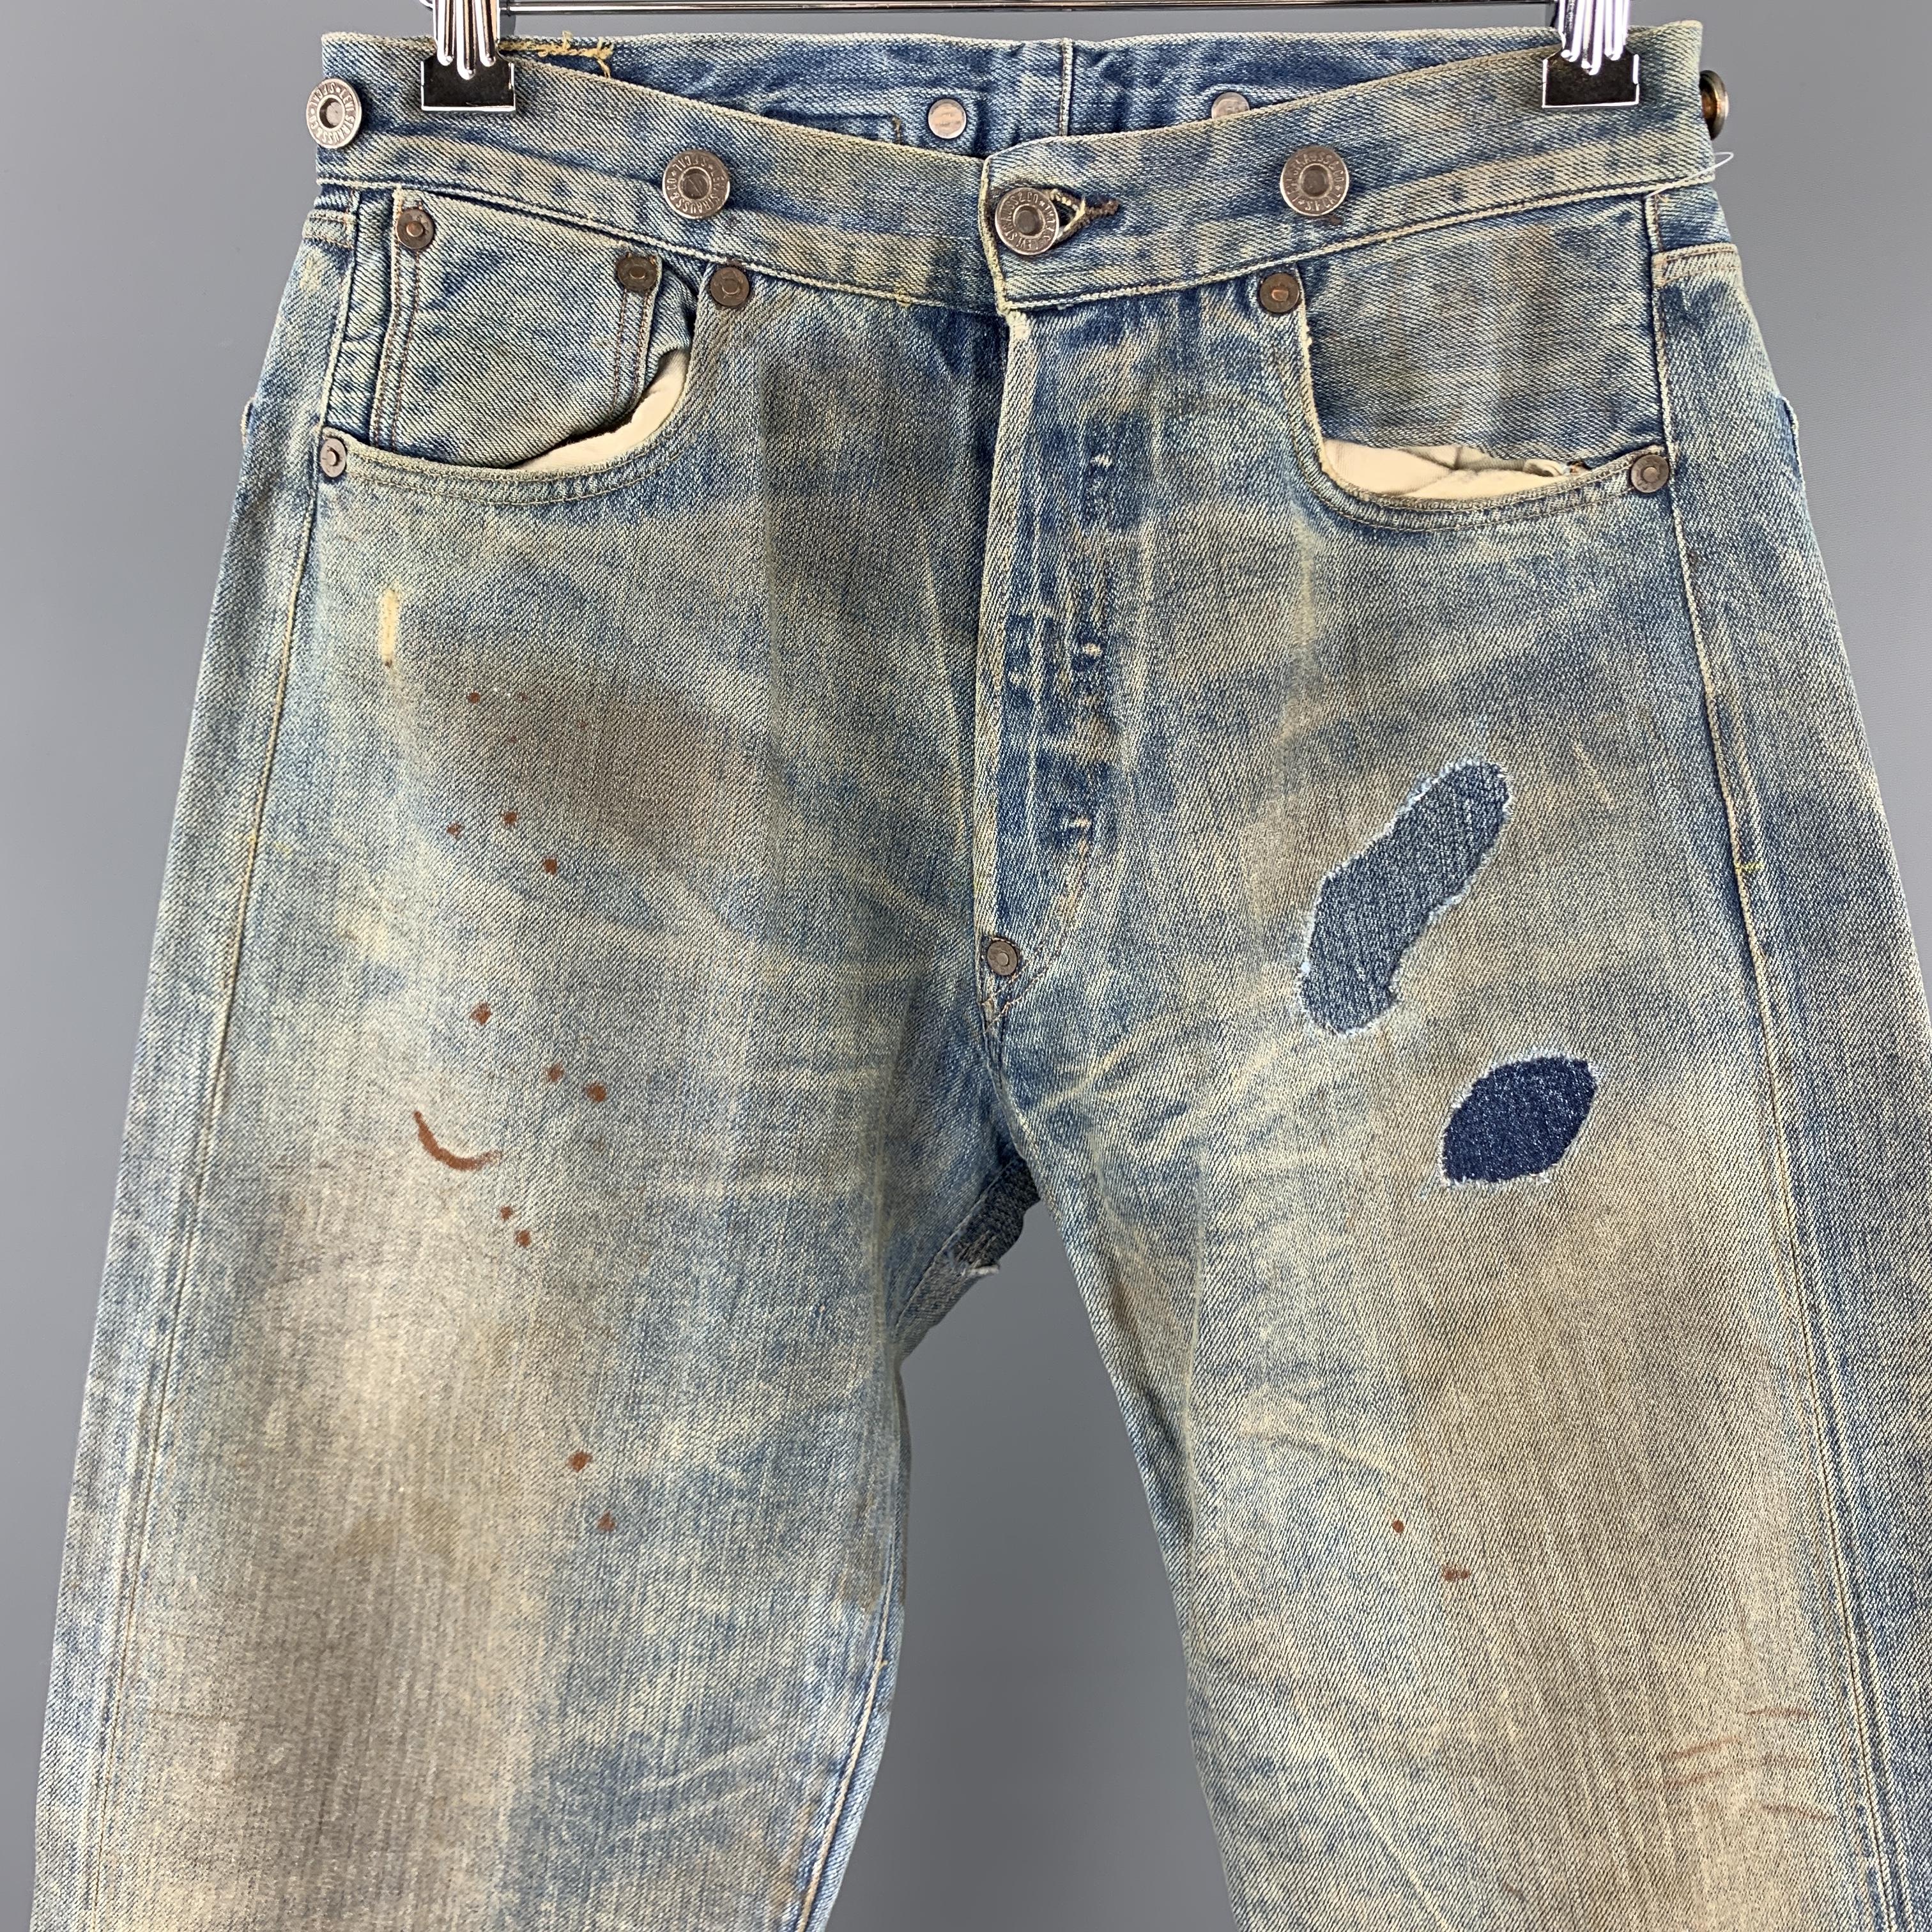 LEVI'S sample jeans come in dirty wash selvedge denim with distressing details throughout, button fly, patchwork, and brace button waistband. Made in USA.

Excellent Pre-Owned Condition.
Marked: (no size)

Measurements:

Waist: 27 in.
Rise: 11.5